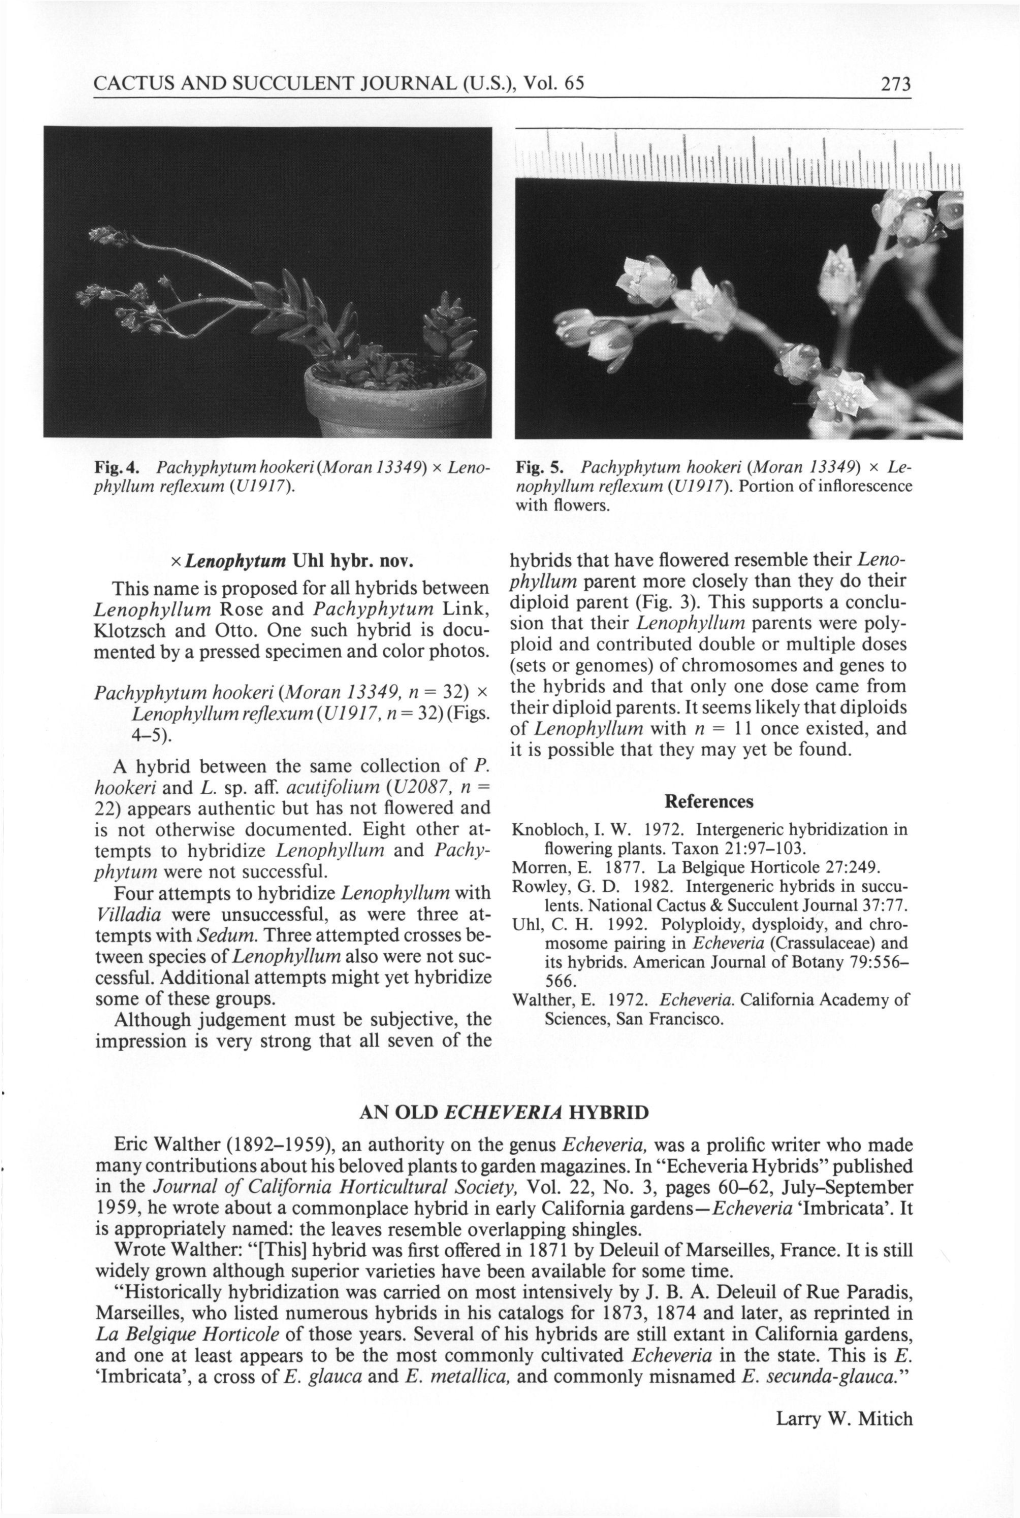 Eric Walther (1892-1959), an Authority on the Genus Echeveria, Was a Prolific Writer Who Made Many Contributions About His Beloved Plants to Garden Magazines